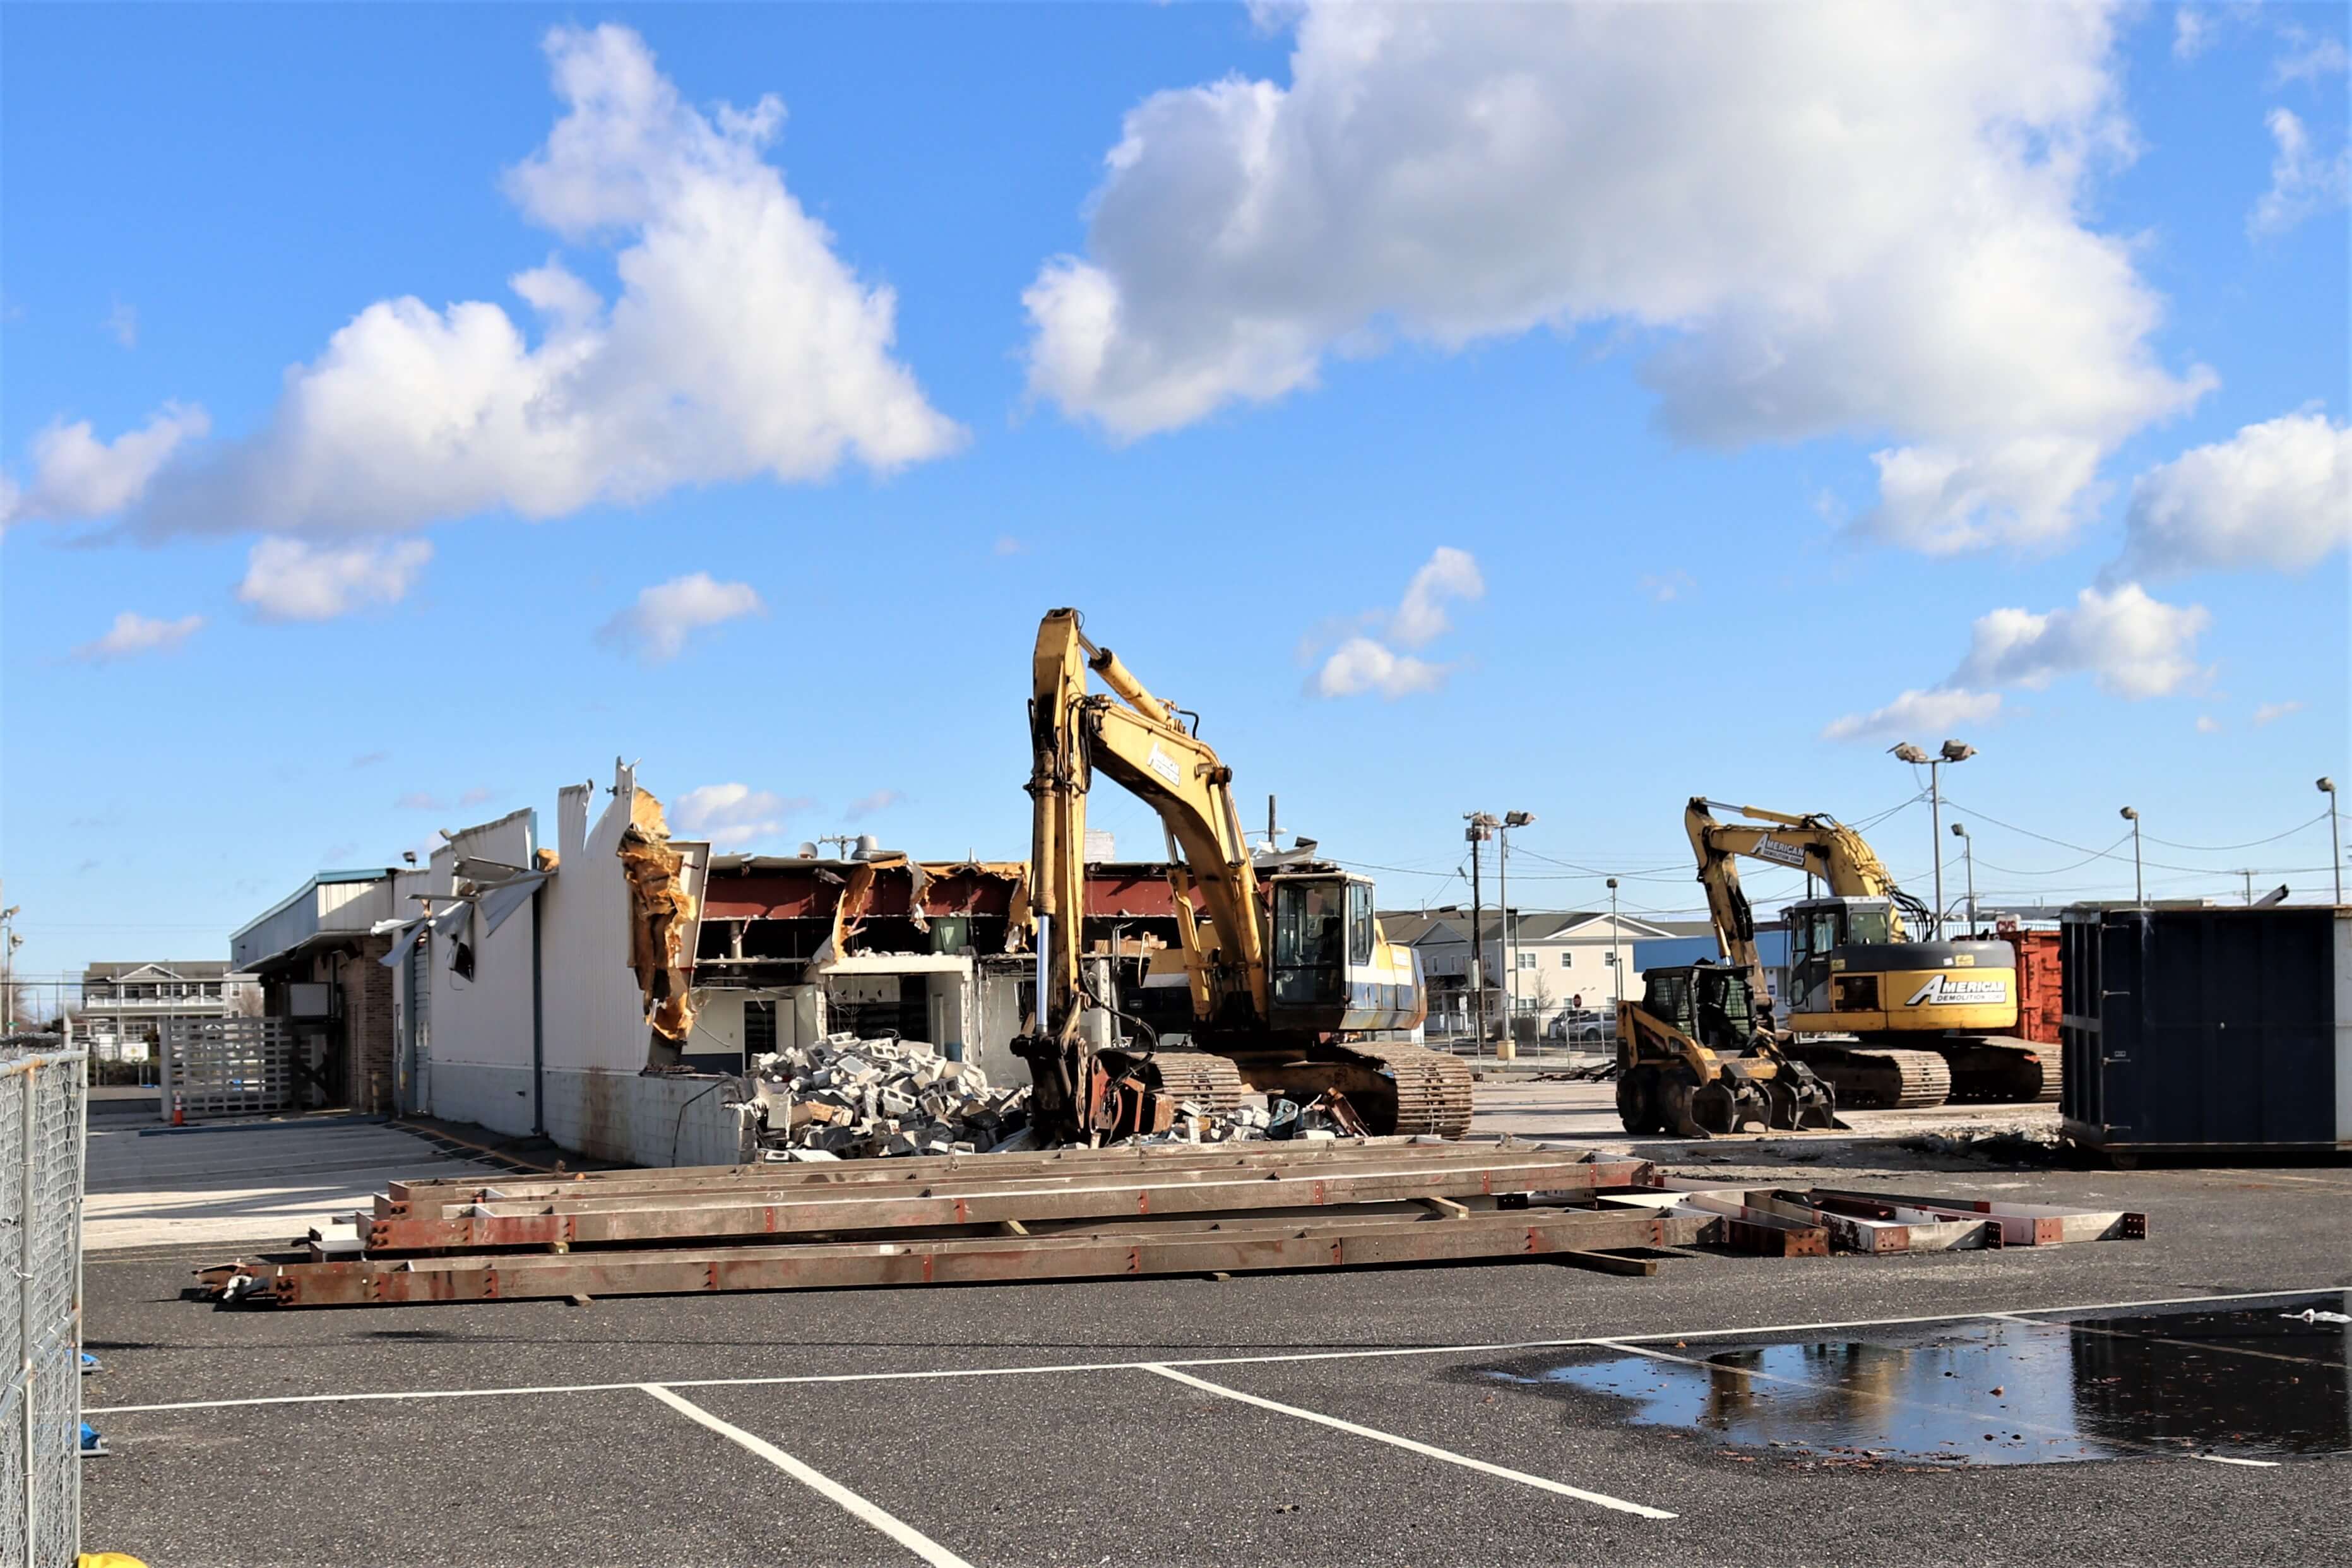 Demolition of a former car dealership building began recently. The property has been approved for residential development